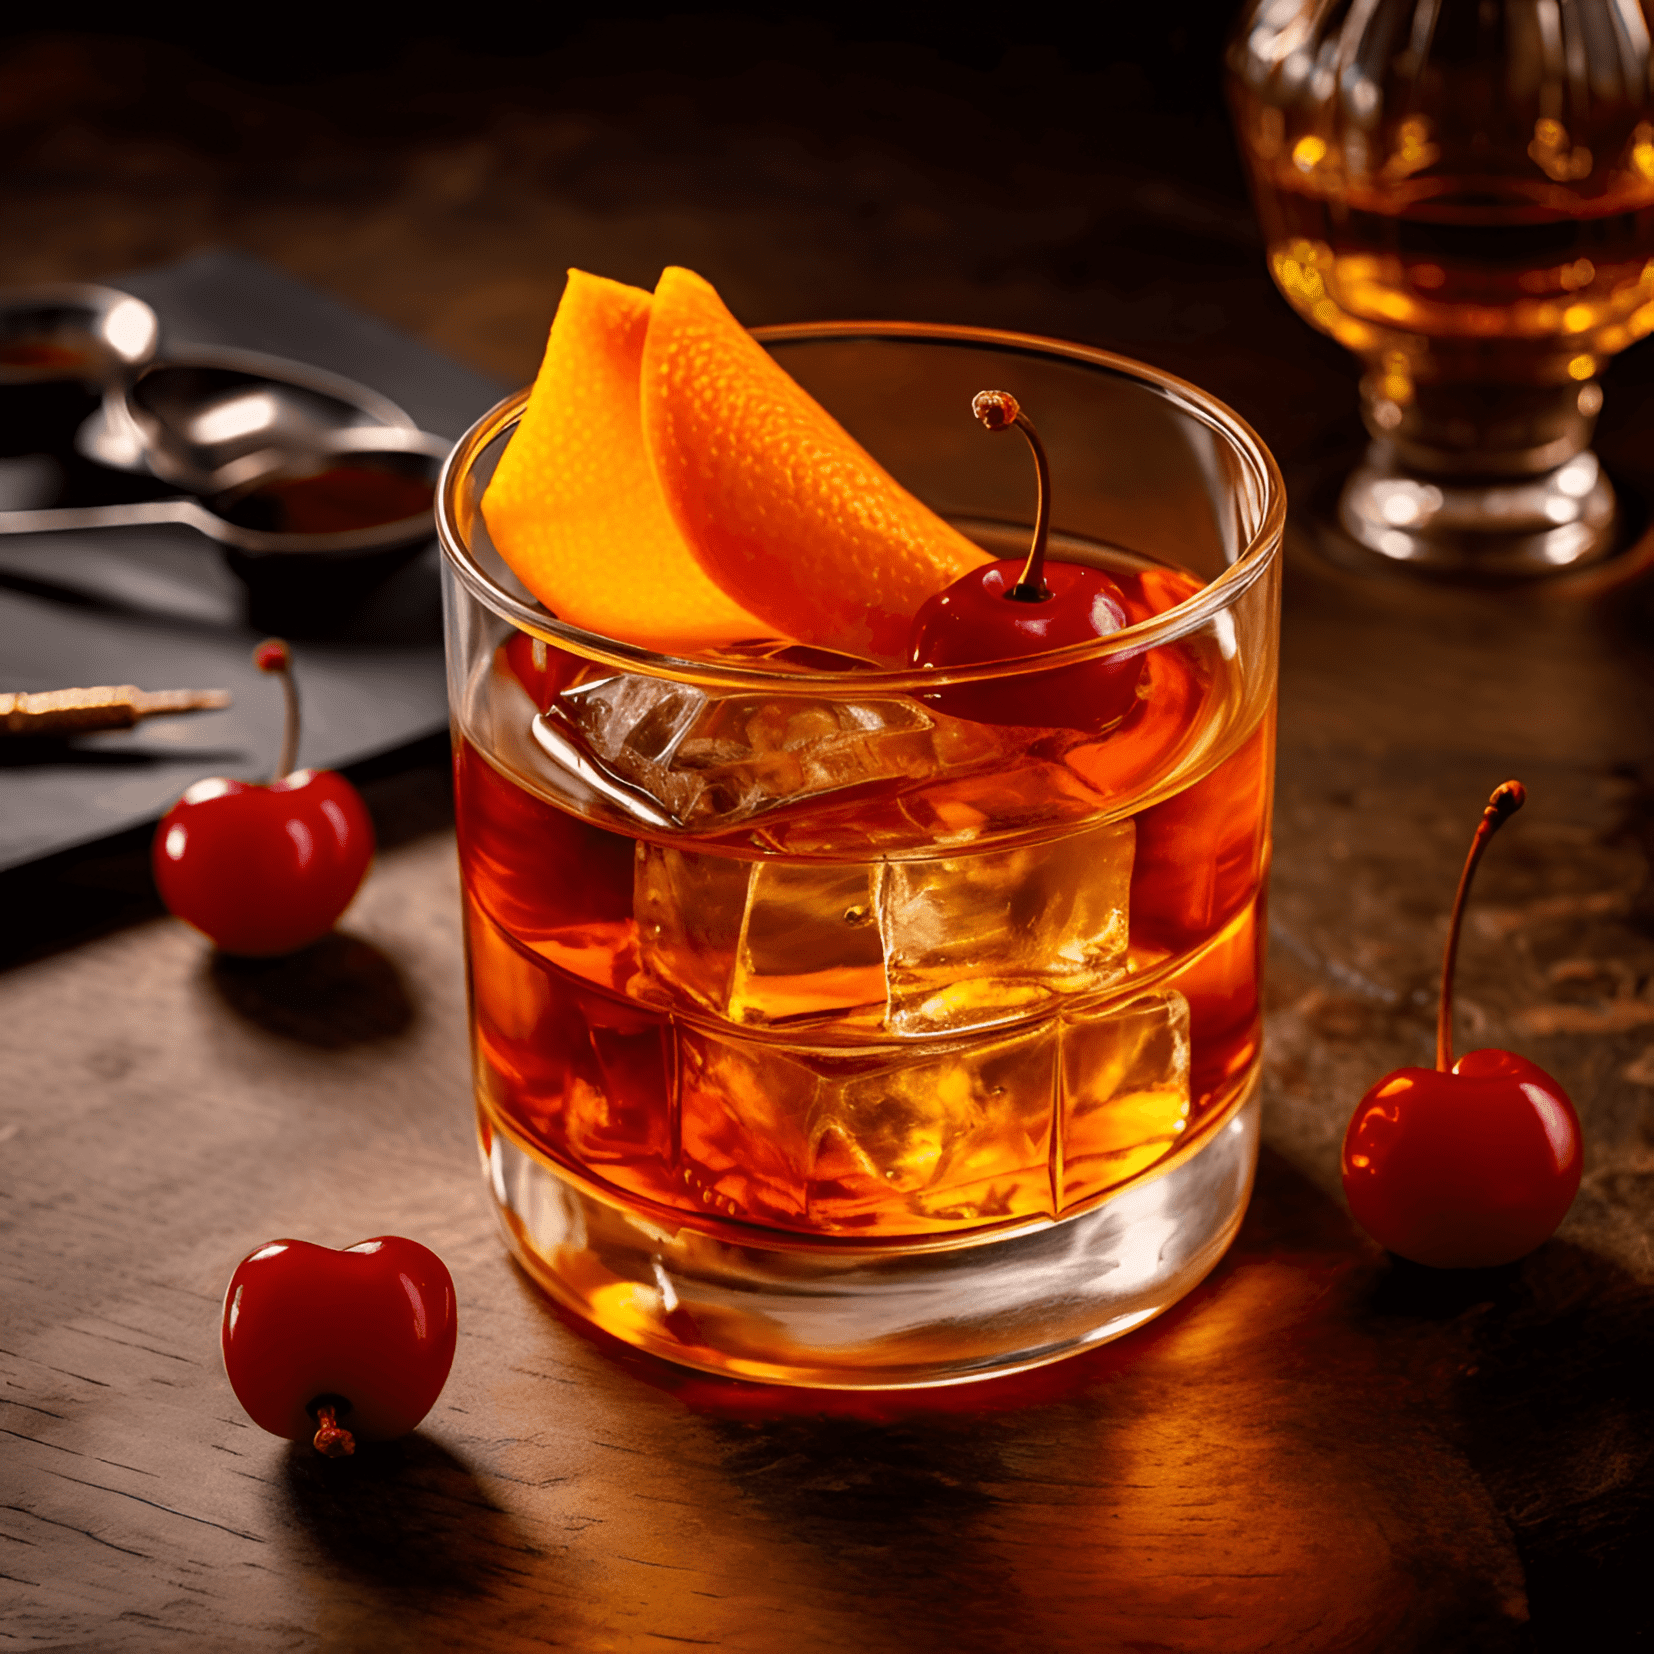 Kentucky B Cocktail Recipe - The Kentucky B cocktail has a rich, smooth, and slightly sweet taste with a hint of spice. The bourbon provides a strong, oaky base, while the other ingredients add complexity and depth to the flavor profile.